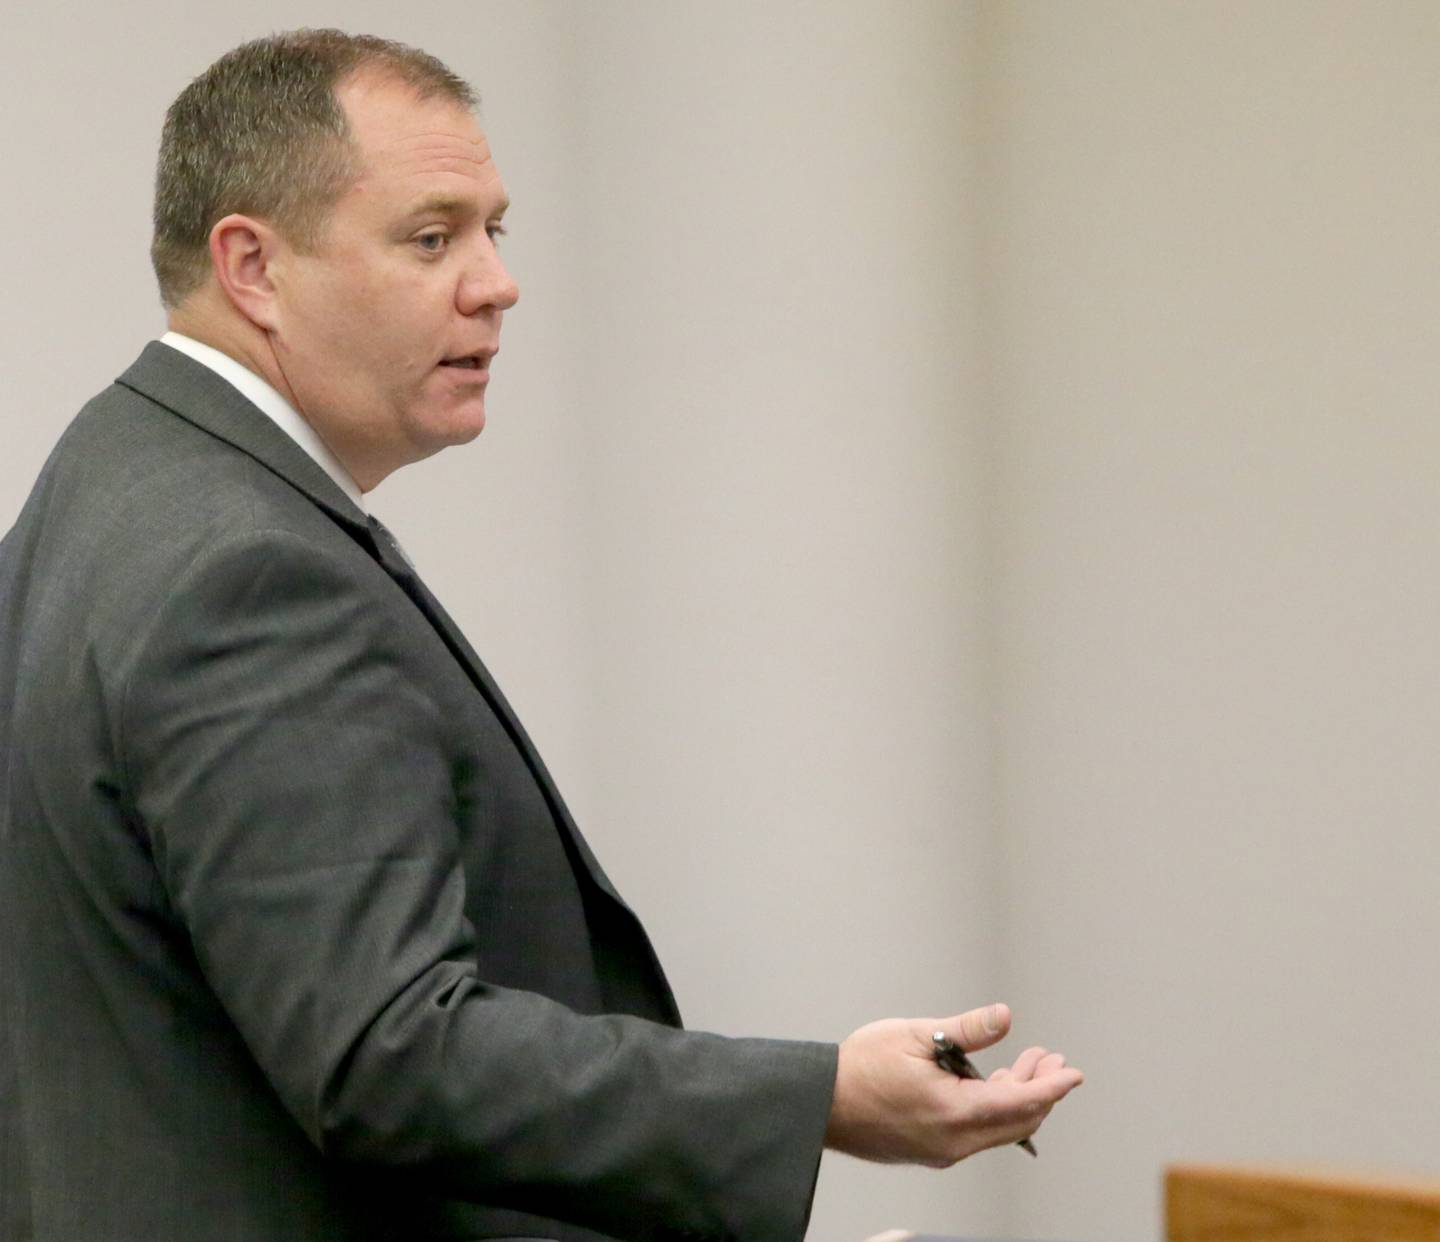 Assistant Public Defender Ryan Hamer, speaks to the jury during opening statements in the trial of Donald Fredres in the courtroom at the La Salle County Government Complex on Tuesday, April 26, 2022 in Ottawa.